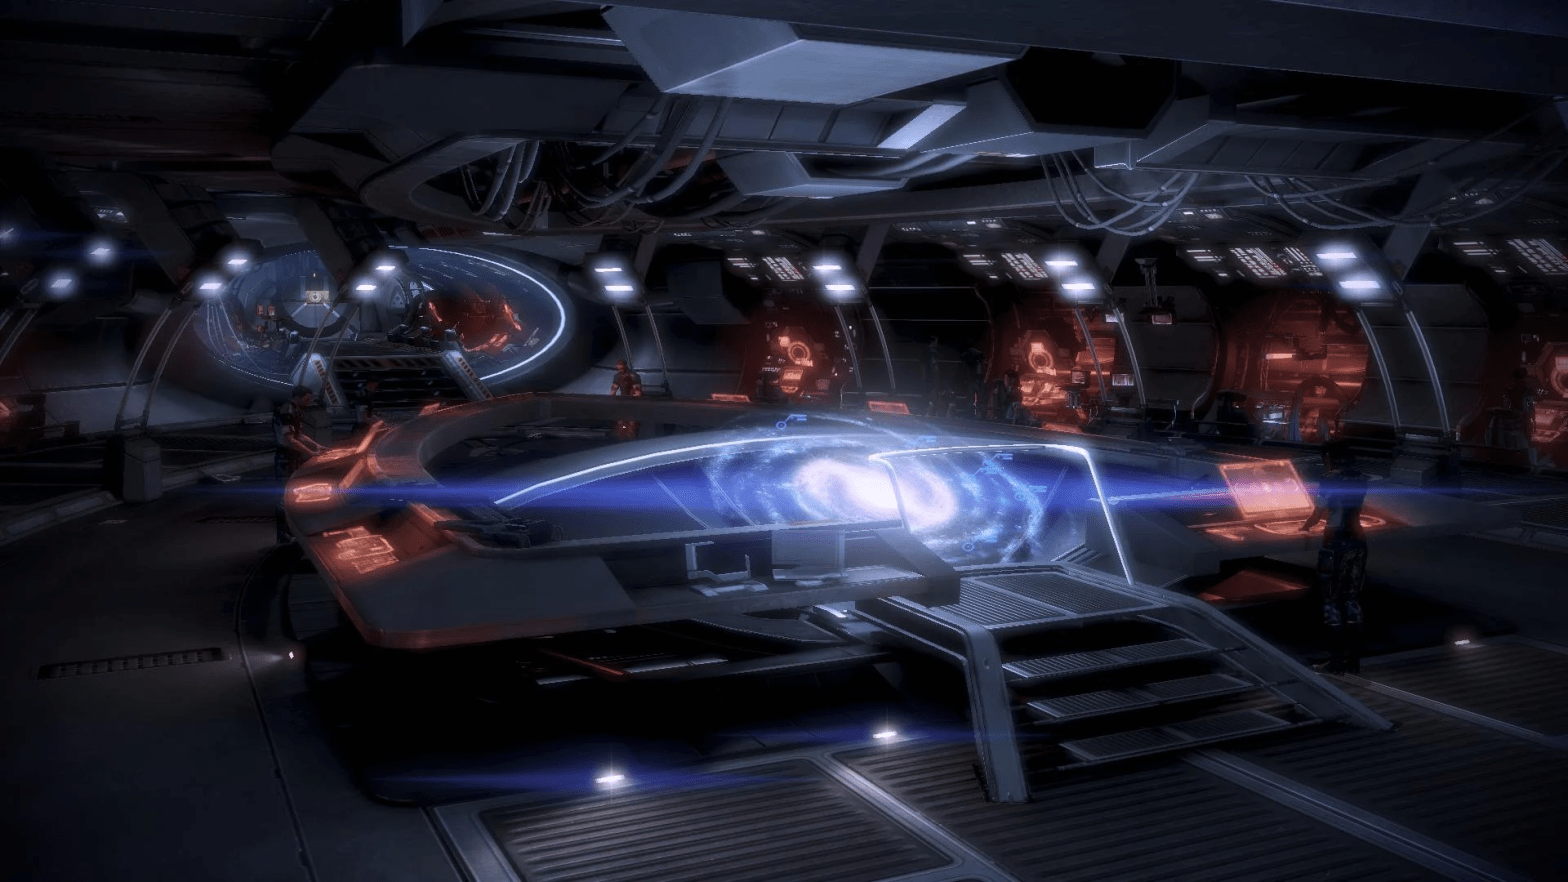 The CIC of the Normandy SR2, as seen in Mass Effect 3. (Screenshot: Bioware/EA)